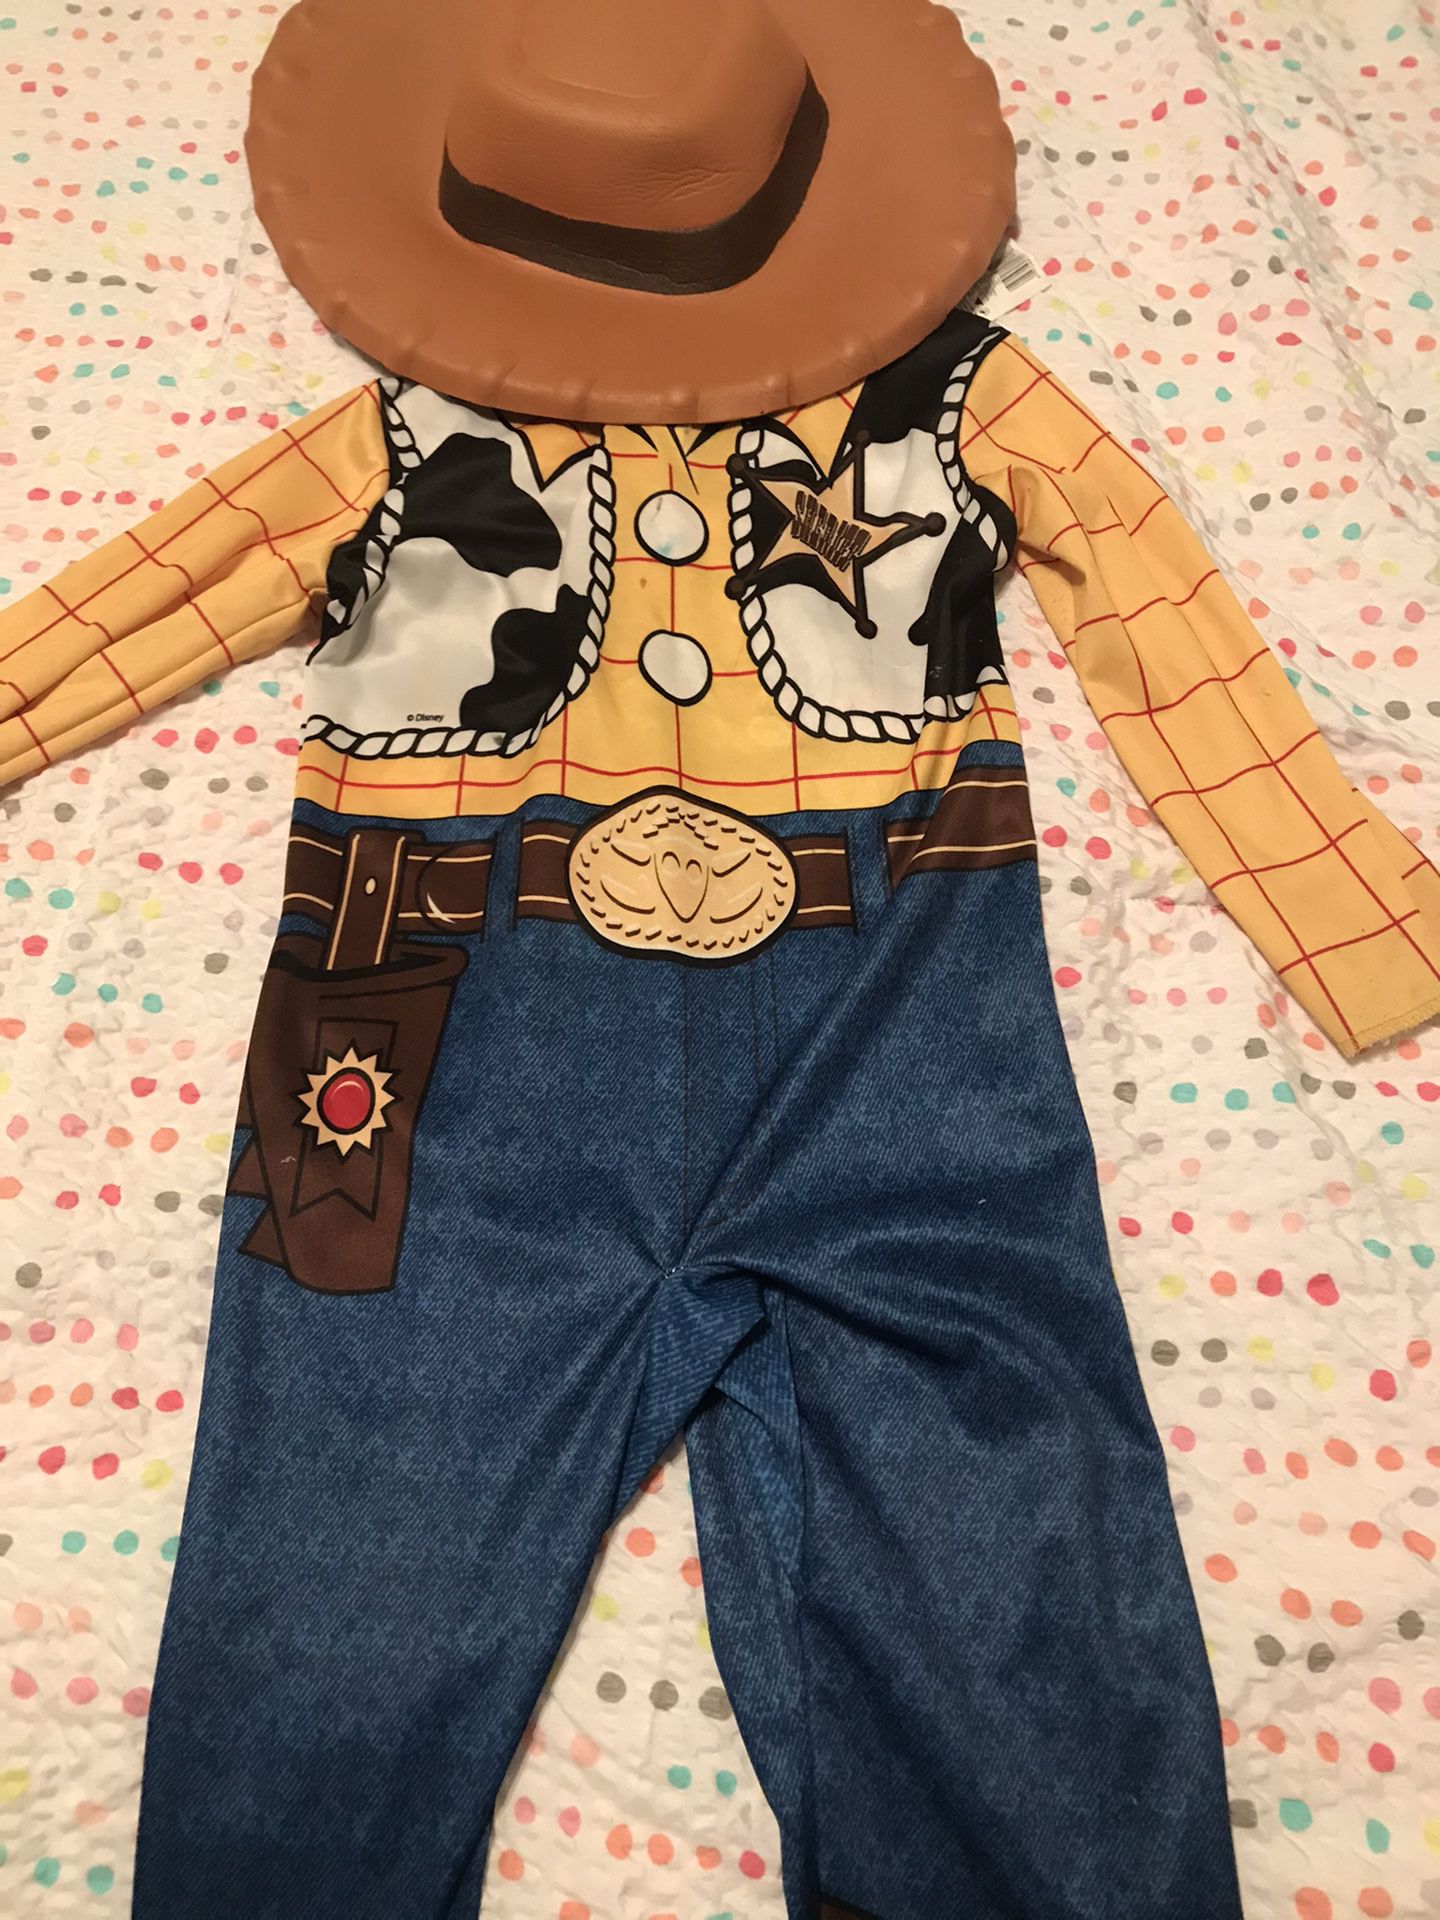 3-4t woody costume from toy story